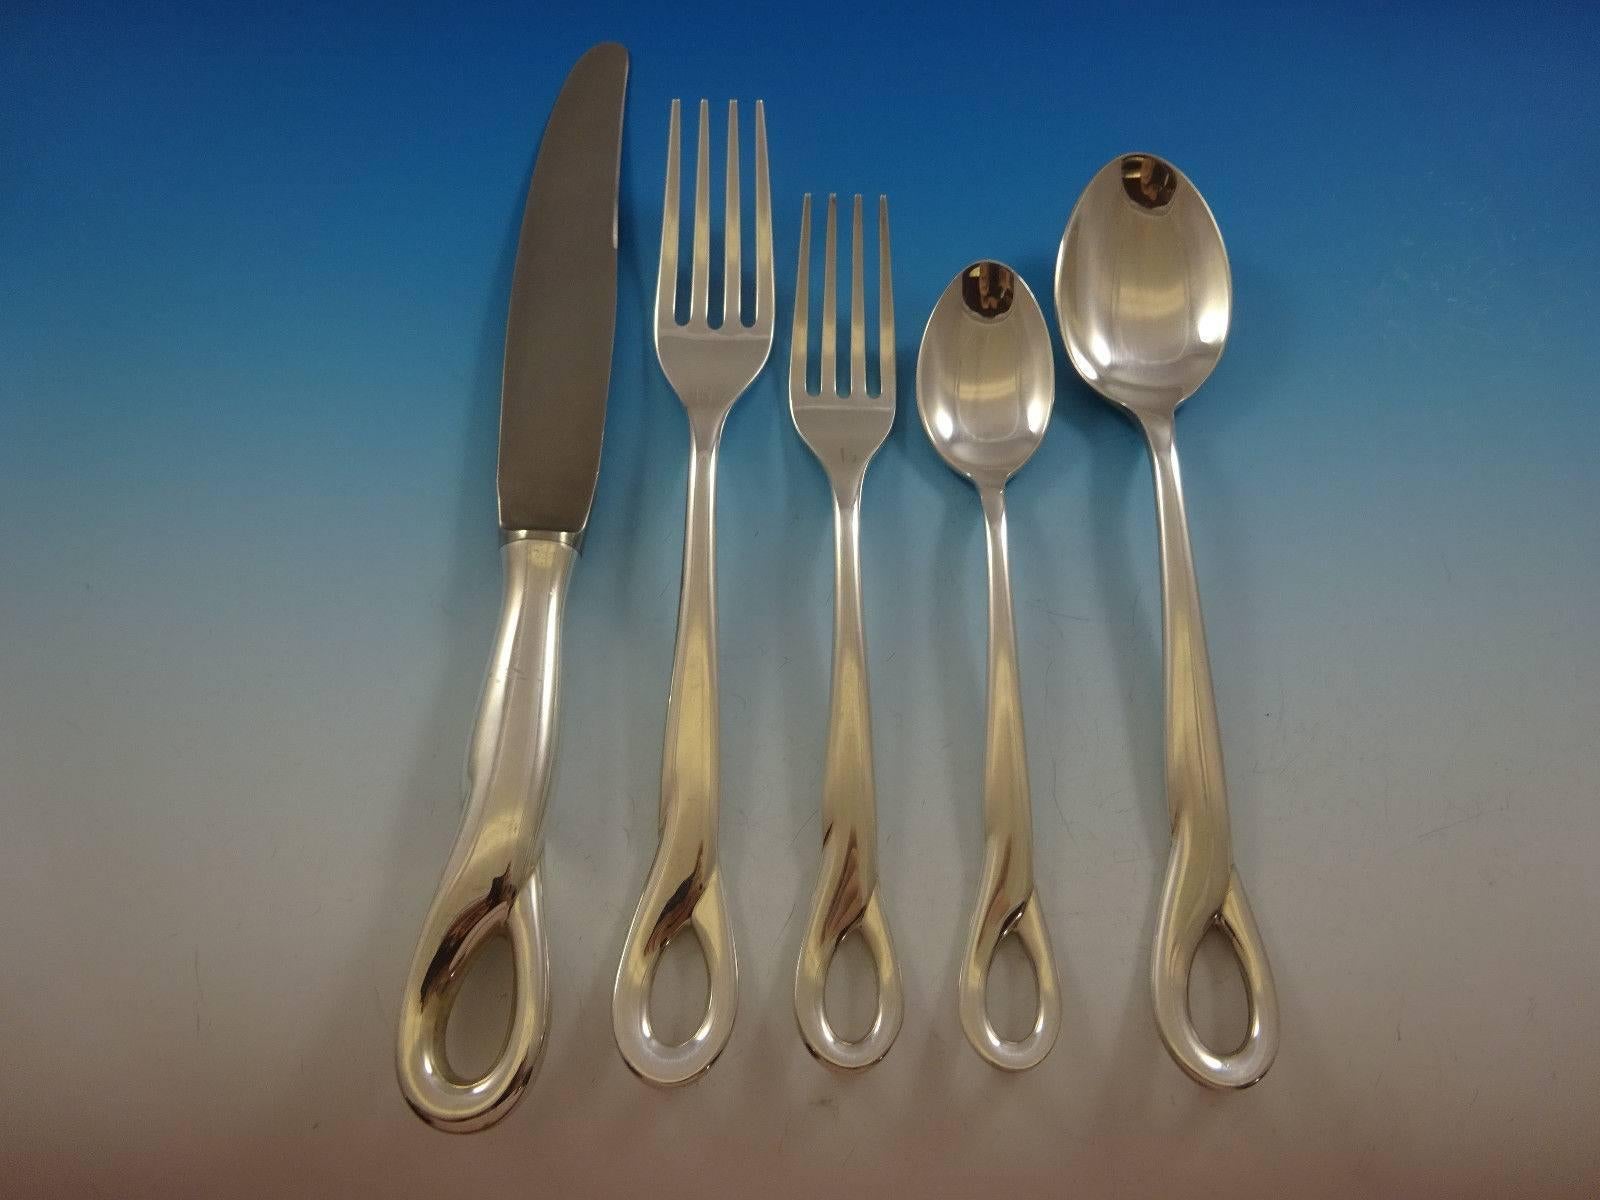 Padova by Tiffany & Co. Sterling Silver flatware set - 117 pieces. This set includes:

12 Dinner Size Knives, 9 1/2"
12 Dinner Size Forks, 7 7/8"
12 Salad Forks, 6 7/8"
6 Teaspoons, 6 1/4"
12 Place Soup Spoons, 7 1/2"
12